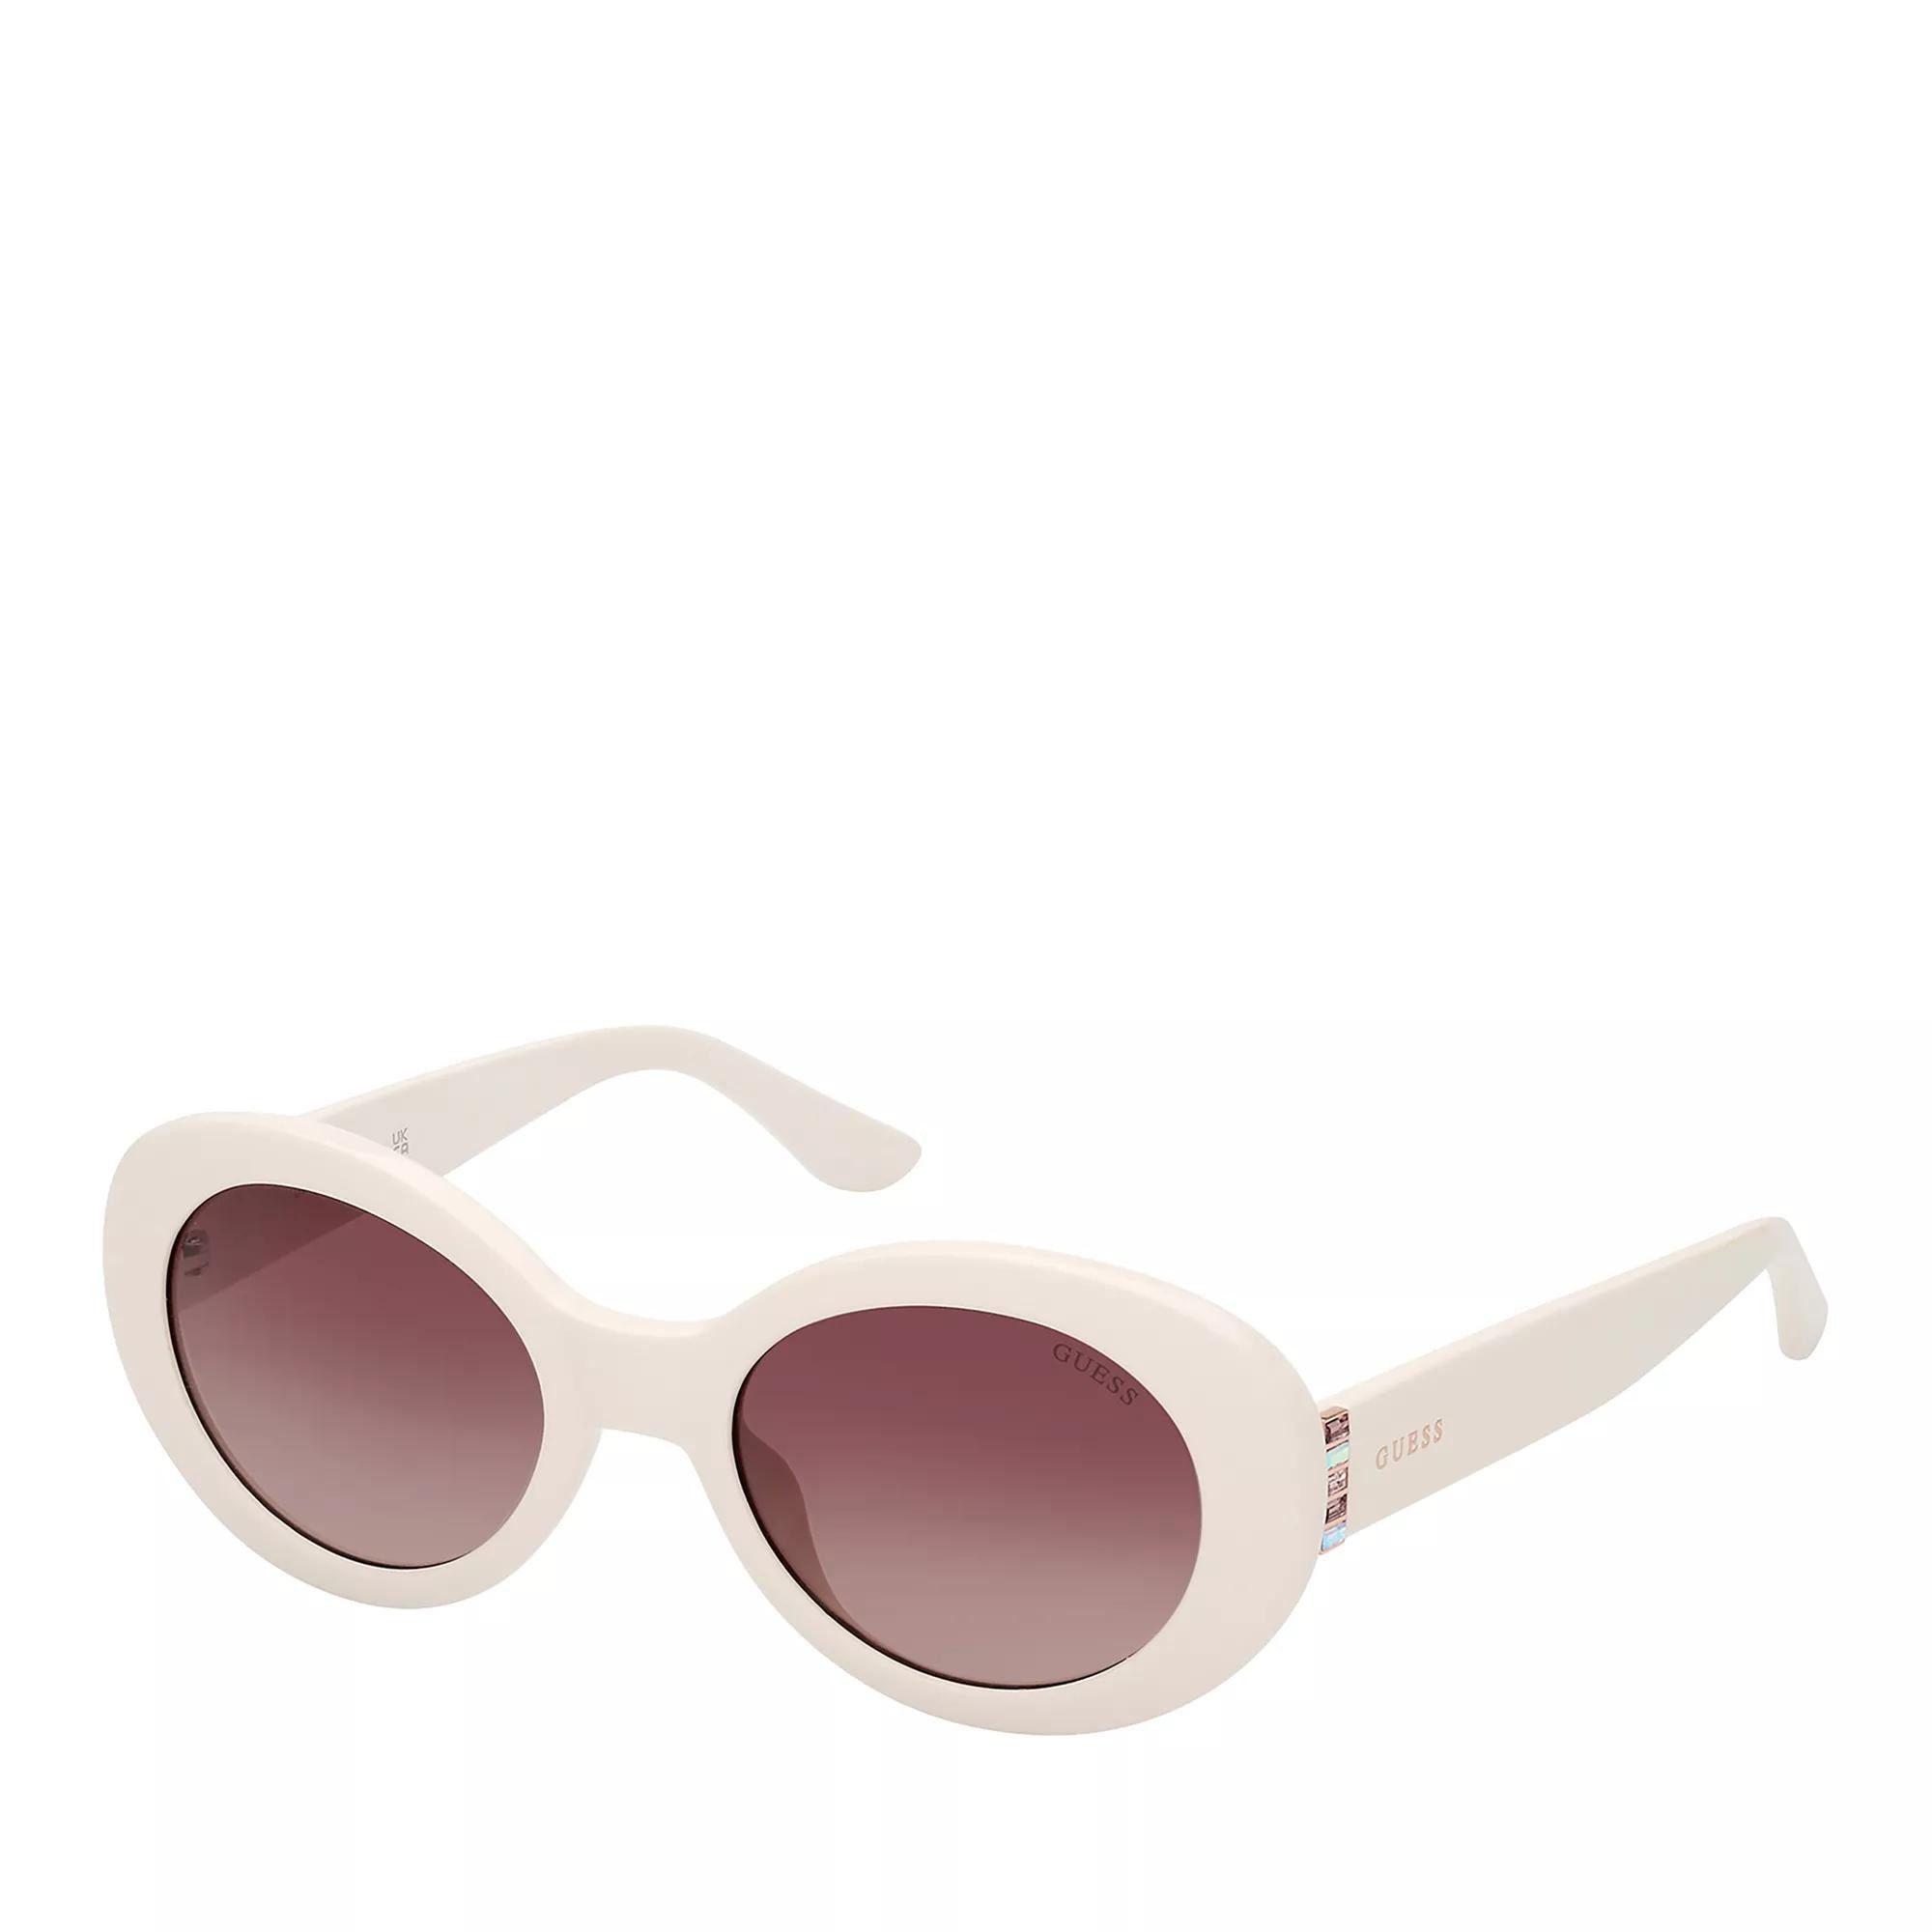 Guess Sonnenbrille white (1-St)